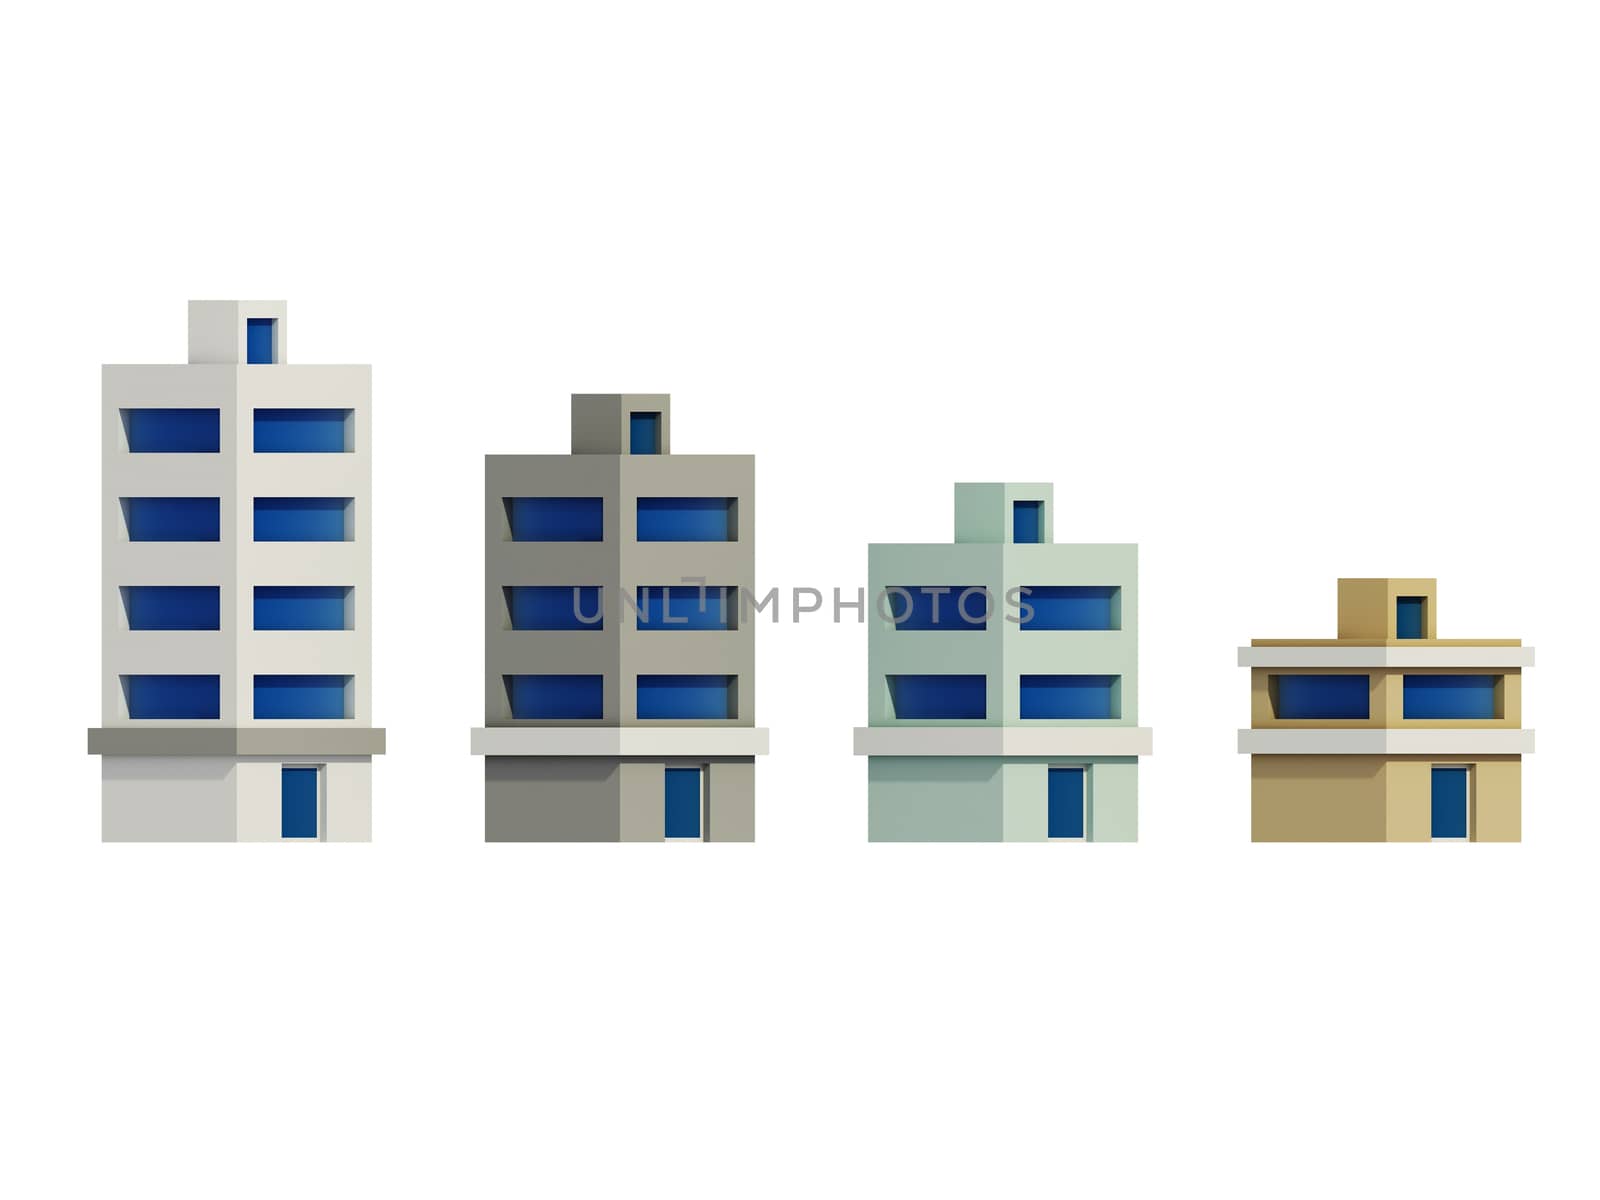 set of the render buildings, Expansion of the series by teerawit